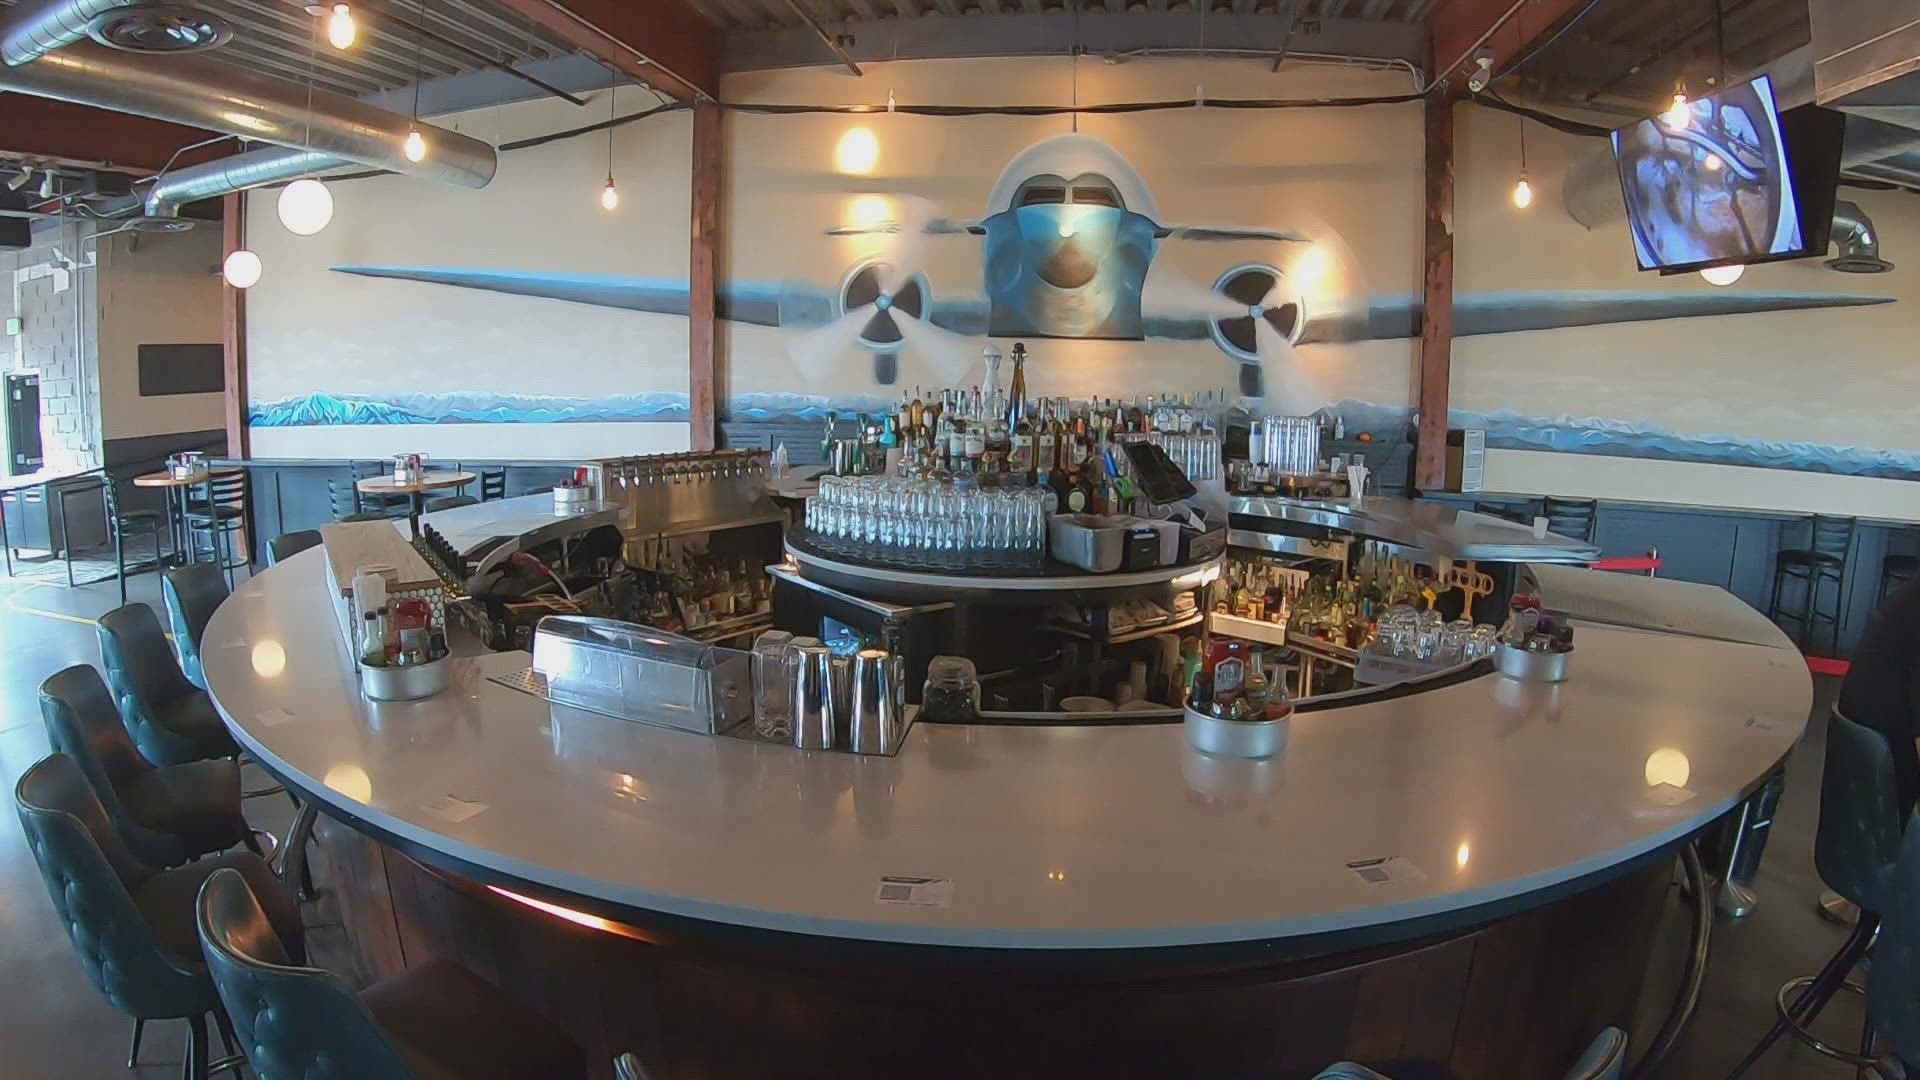 FlyteCo Tower is an aviation-themed brewery with a mission to help support community programs